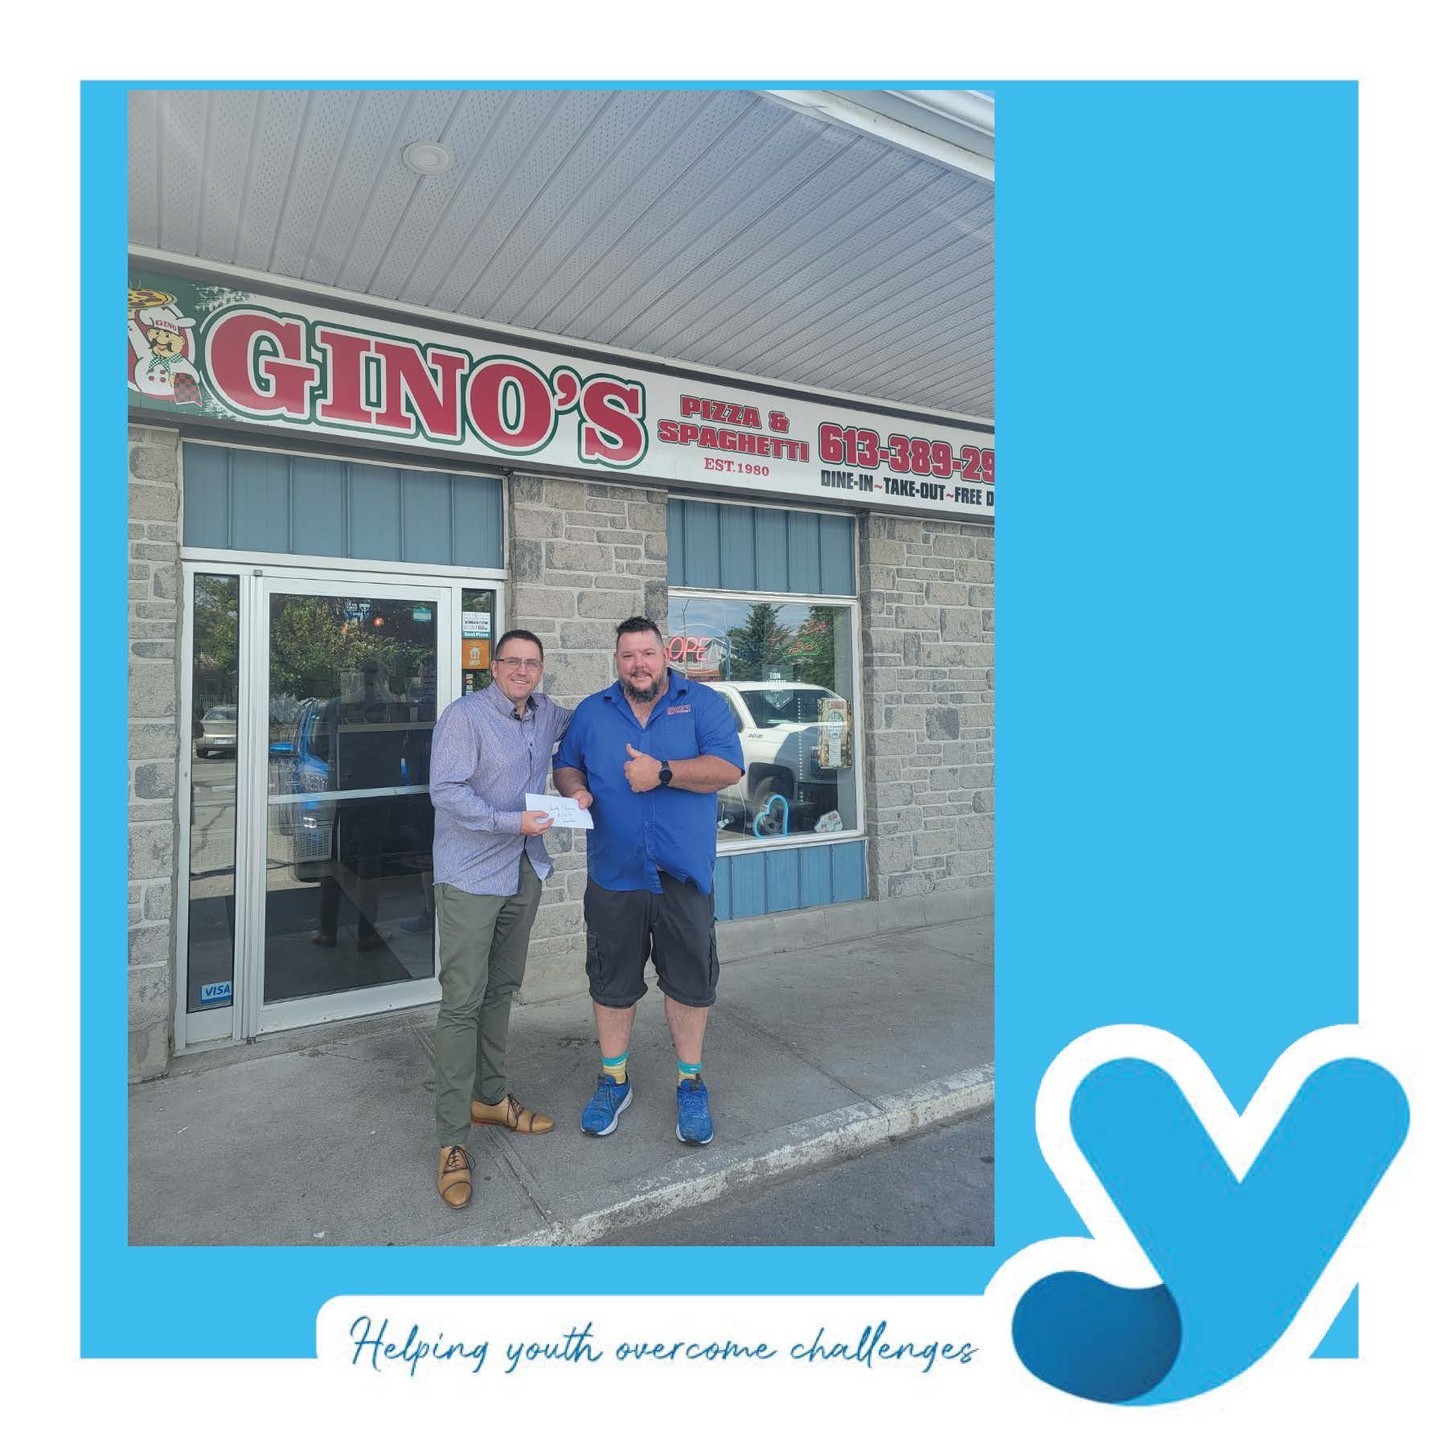 Jan, Justin and the rest of the team at Chinlock and Gino's Pizza came through again. Thanks to the most resent Chinlock event, Youth Diversion is the recipient of $650 that will be used to support our Summer Camps this year.  Welcome Back Chinlock!